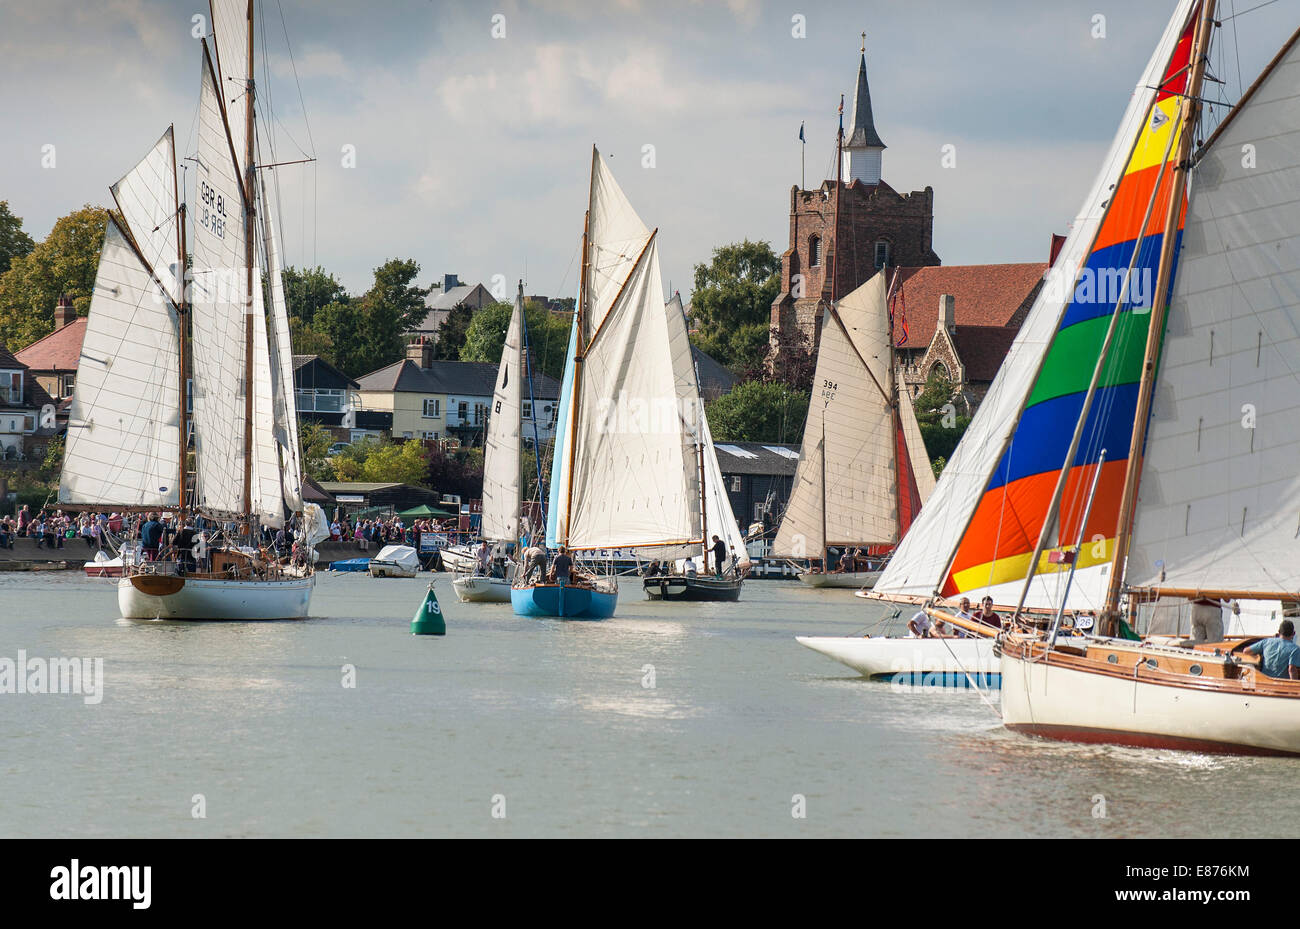 Various sailing craft participate in the spectacular Parade of Sail Blackwater River at the Maldon Regatta in Essex. Stock Photo